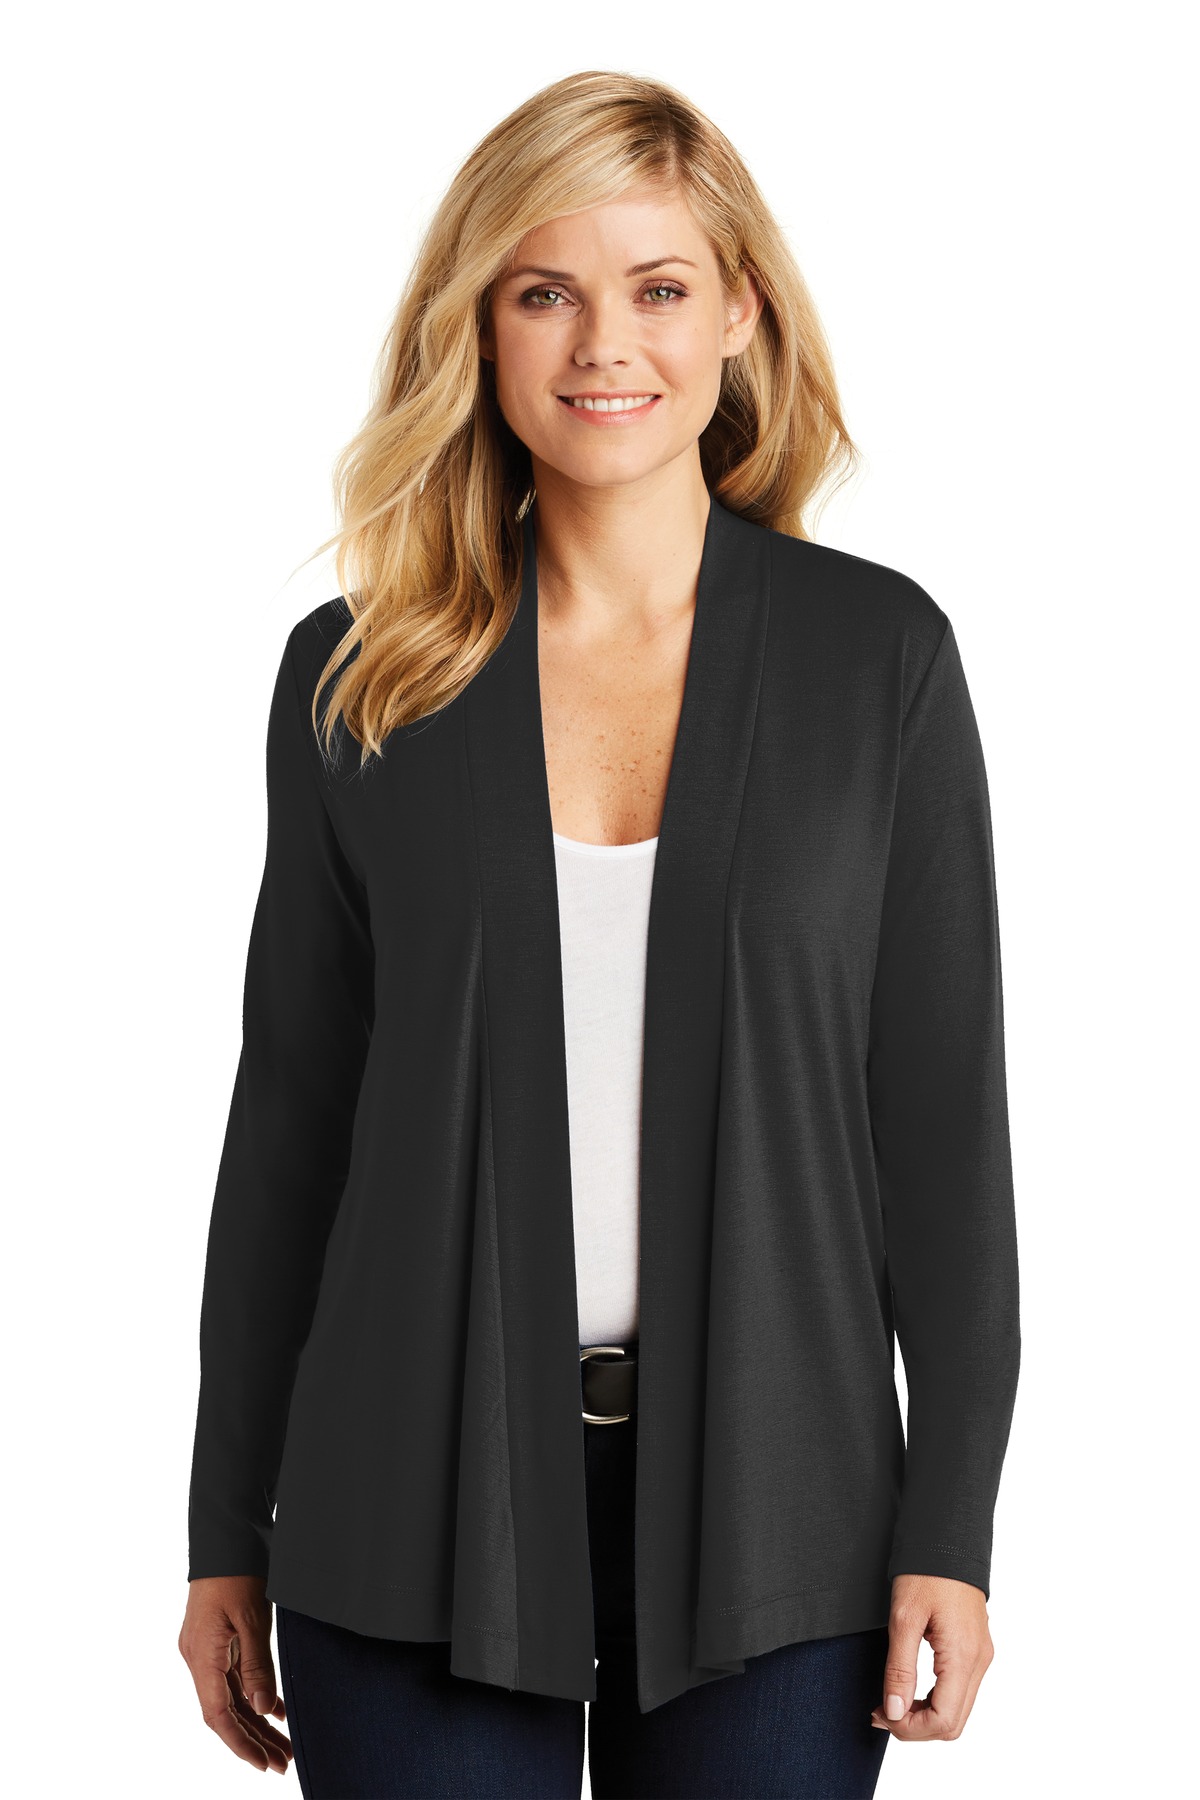 Port Authority Ladies Hospitality Polos & Knits ® Ladies Concept Open Cardigan.-Port Authority